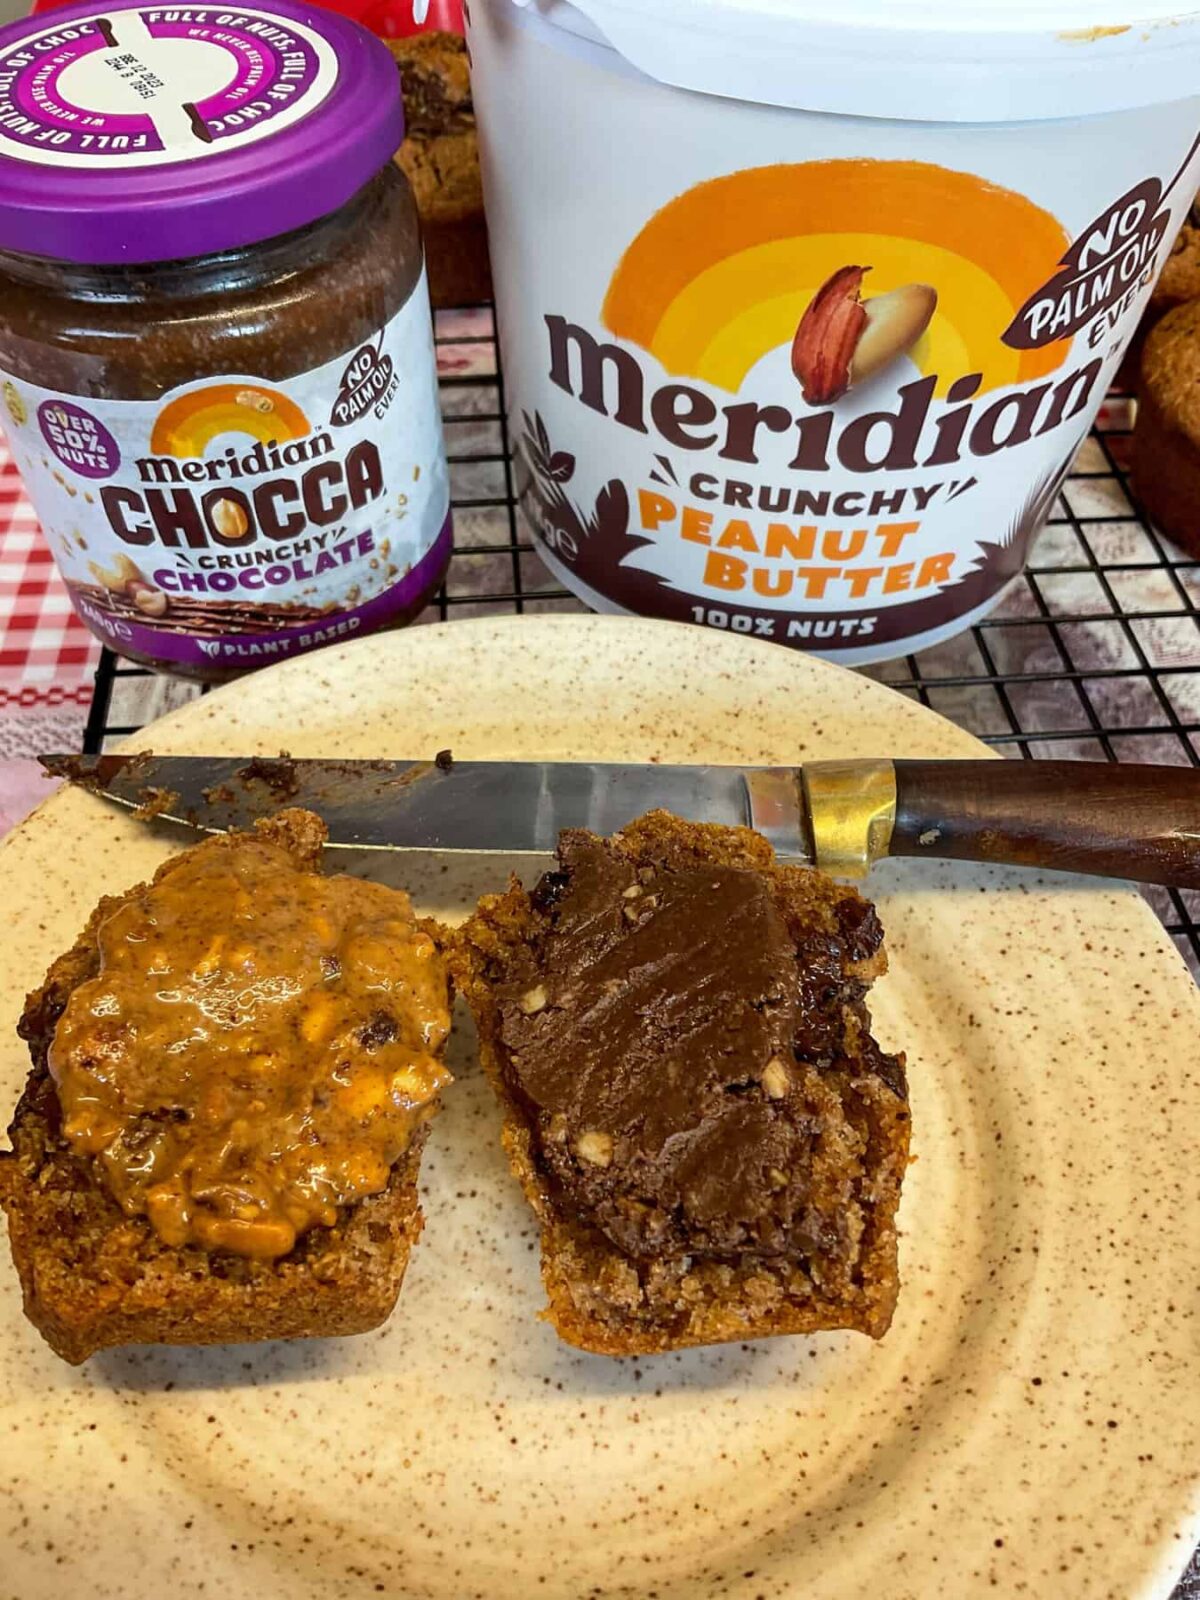 Two slices of muffin with one having peanut butter spread over and the second chocolate spread, chocolate spread jar in background with peanut butter tub.